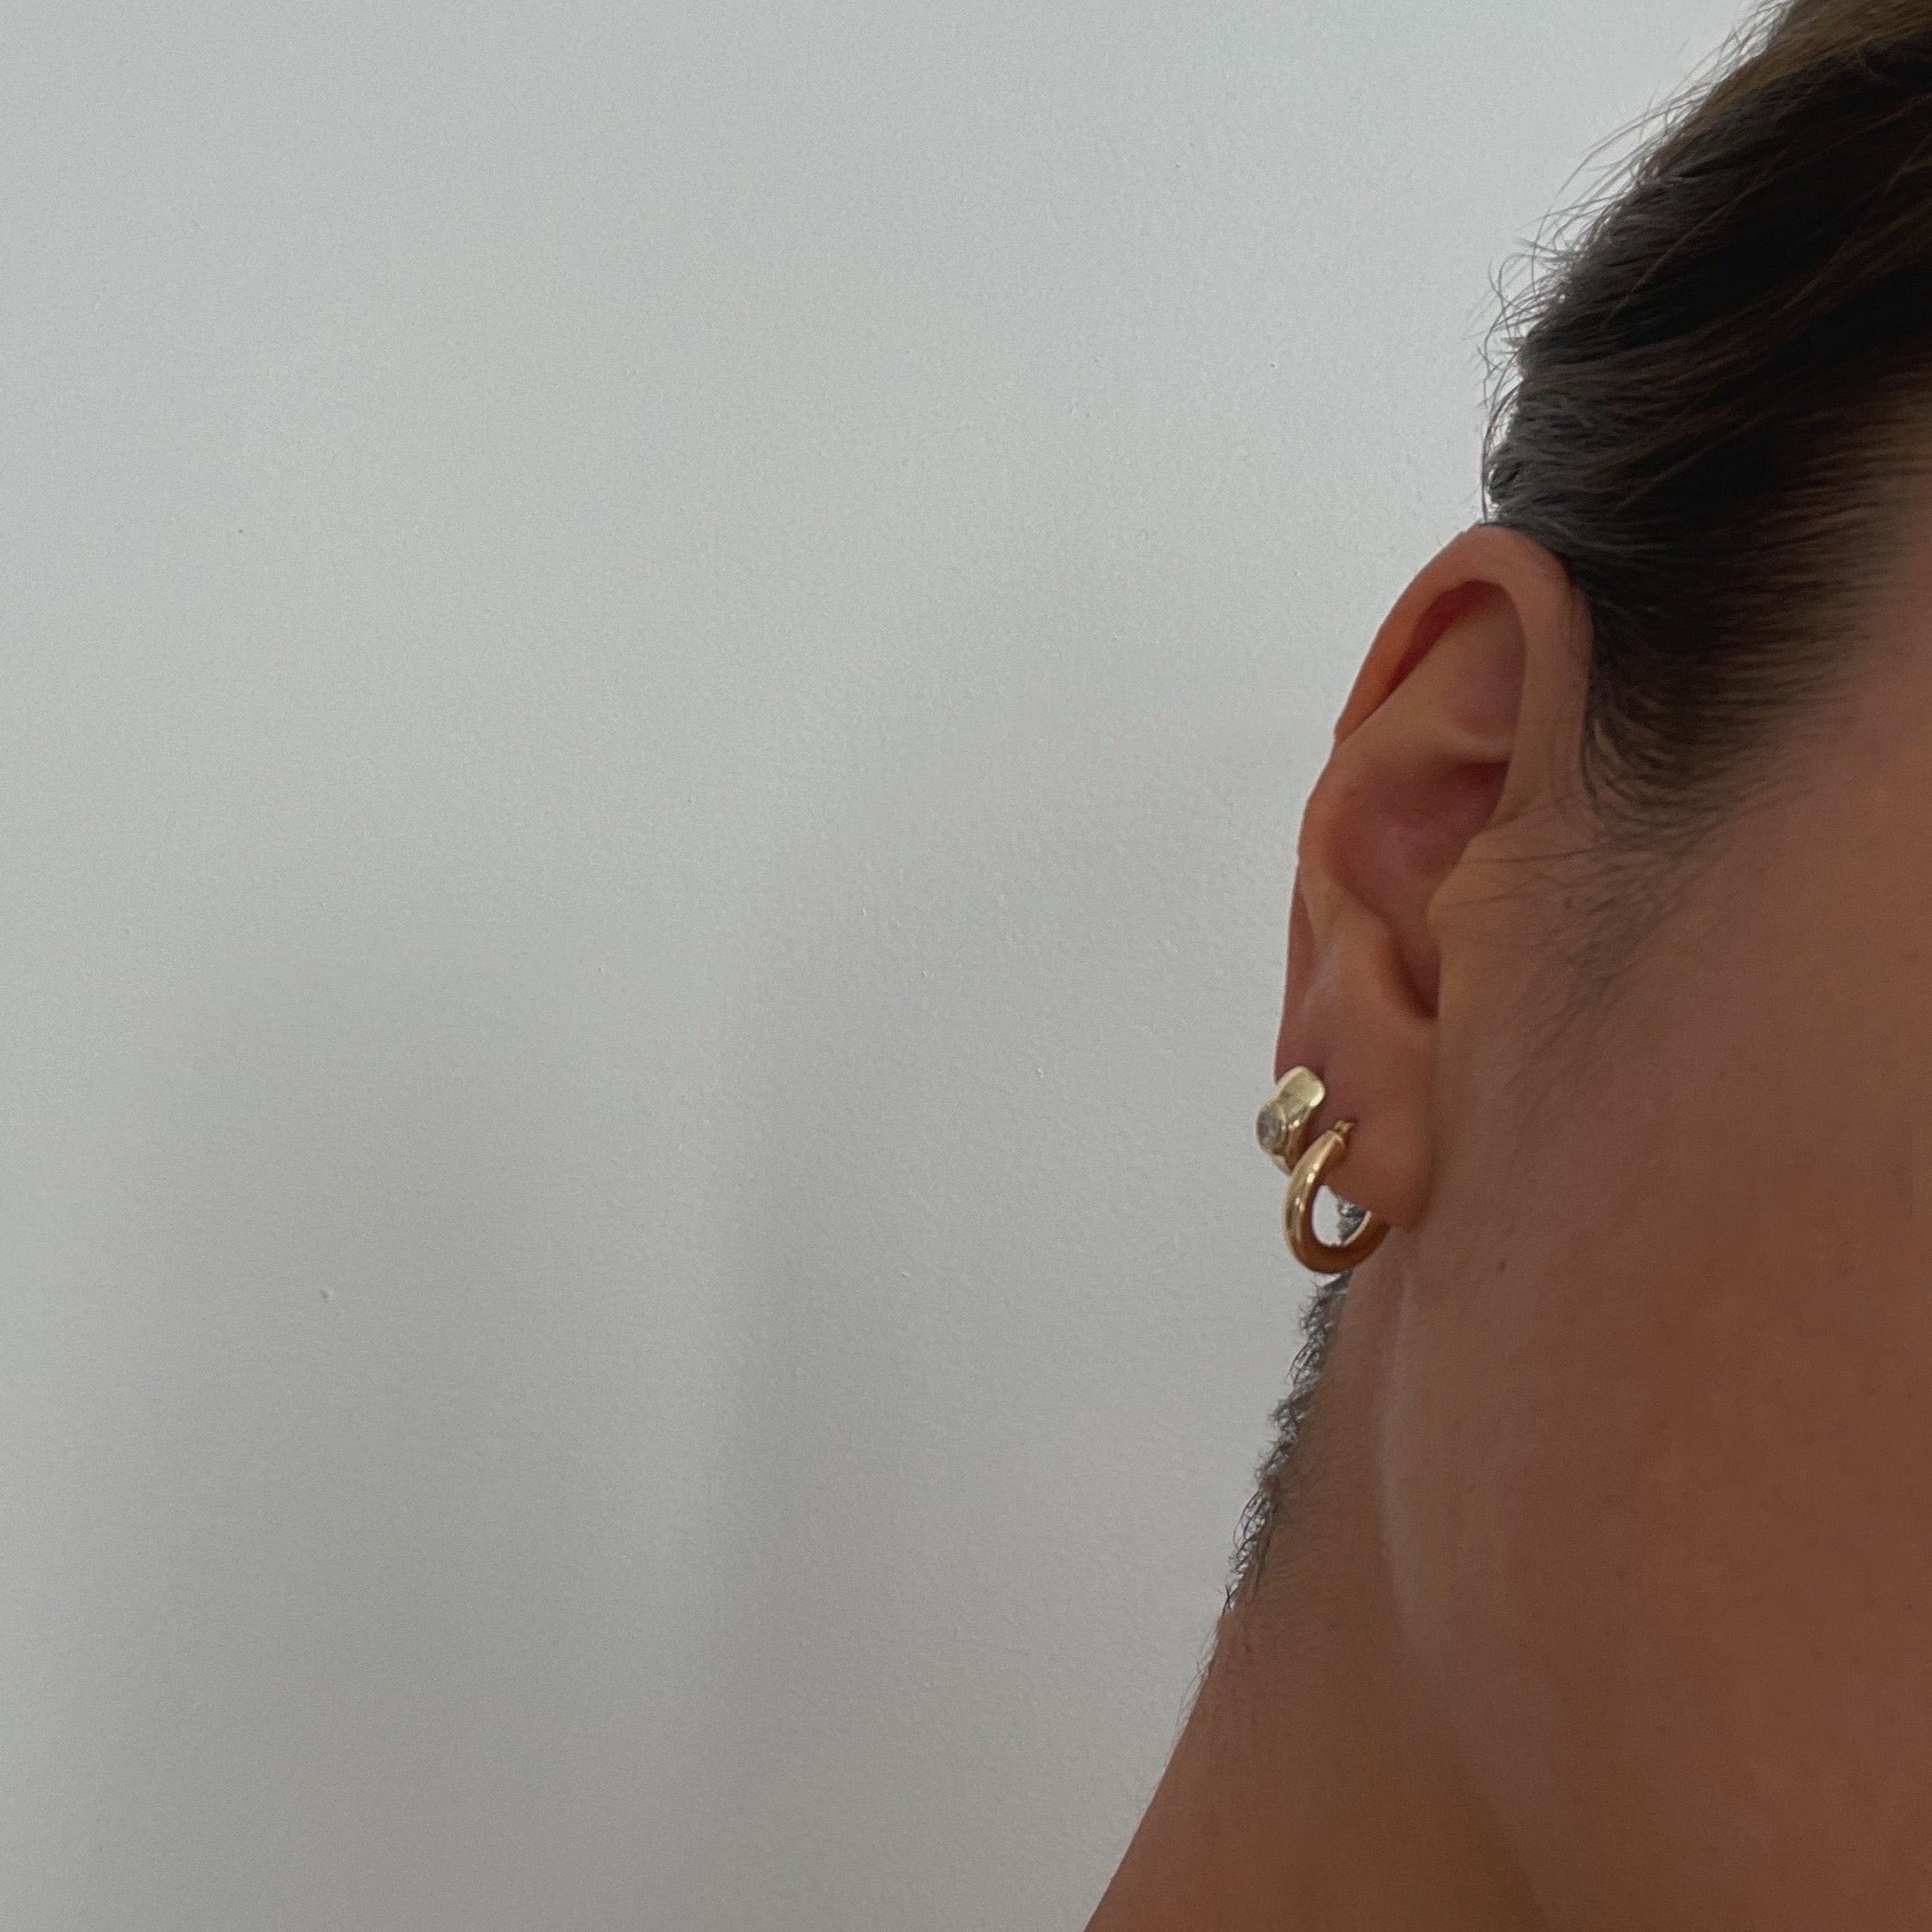 Classic Hoop Earrings - Extra Small